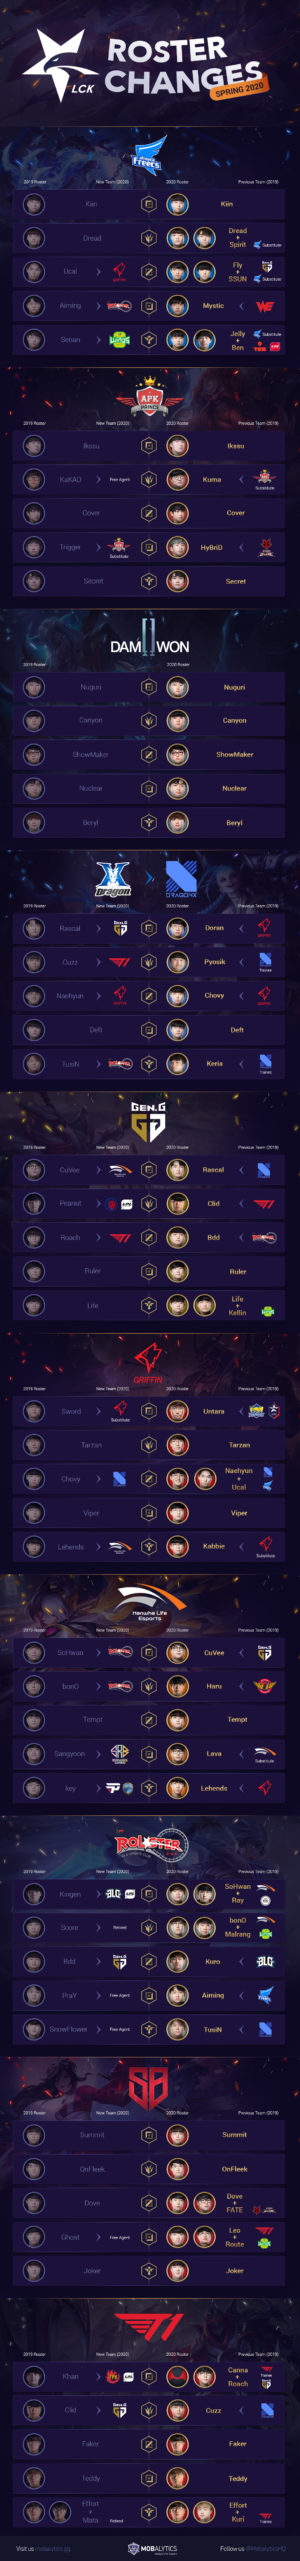 LCK Roster Changes Infographic (Spring 2020 Teams)